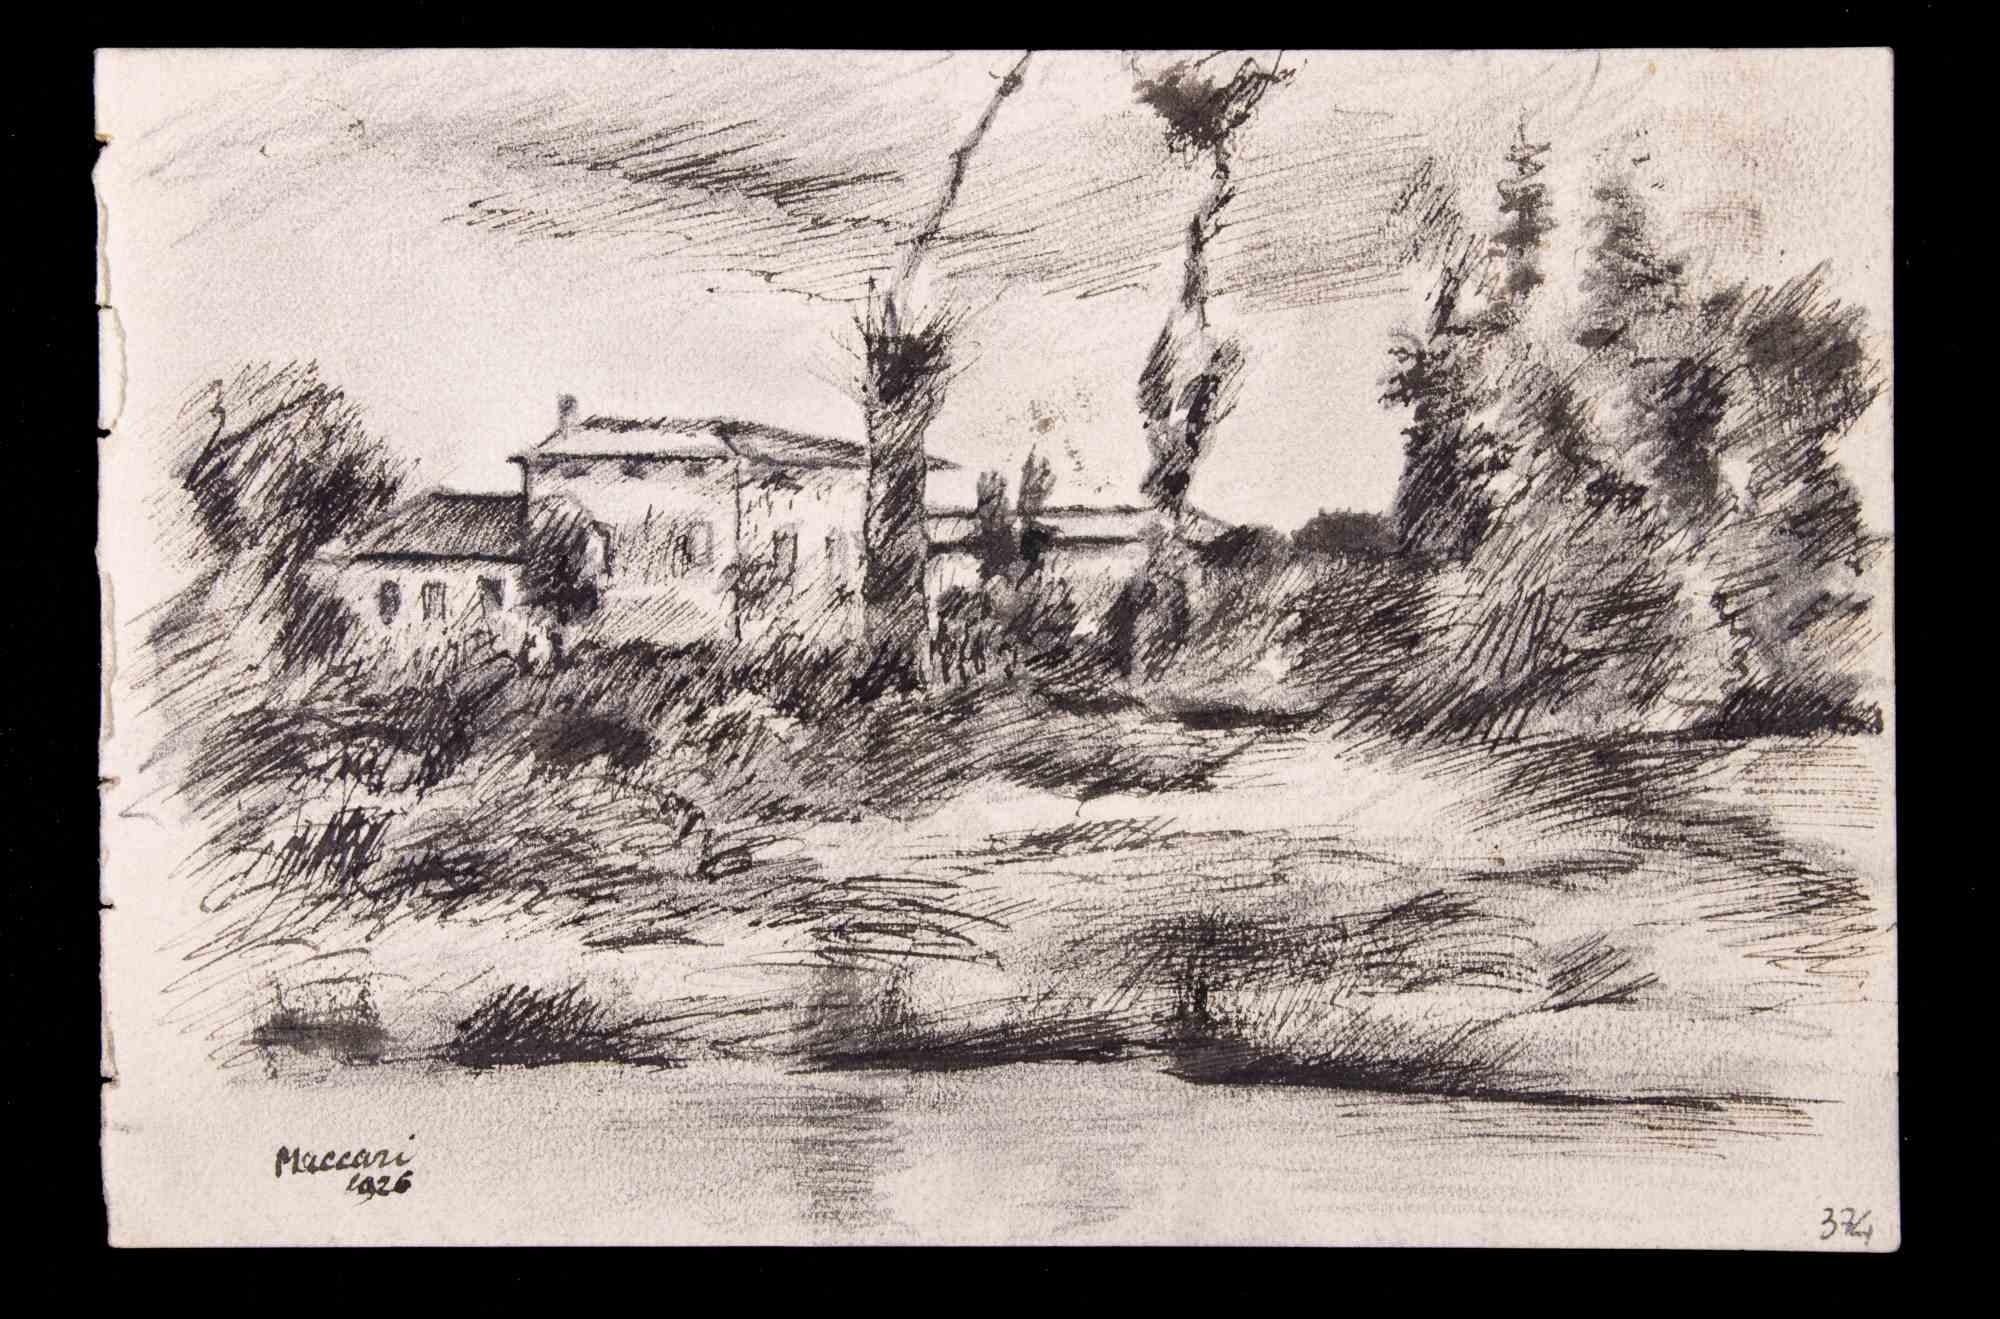 Landscape is a china ink Drawing realized by Mino Maccari (1924-1989) in 1926.

Hand signed and dated on the lower margin.

Good condition on a yellowed paper.

Mino Maccari (Siena, 1924-Rome, June 16, 1989) was an Italian writer, painter, engraver